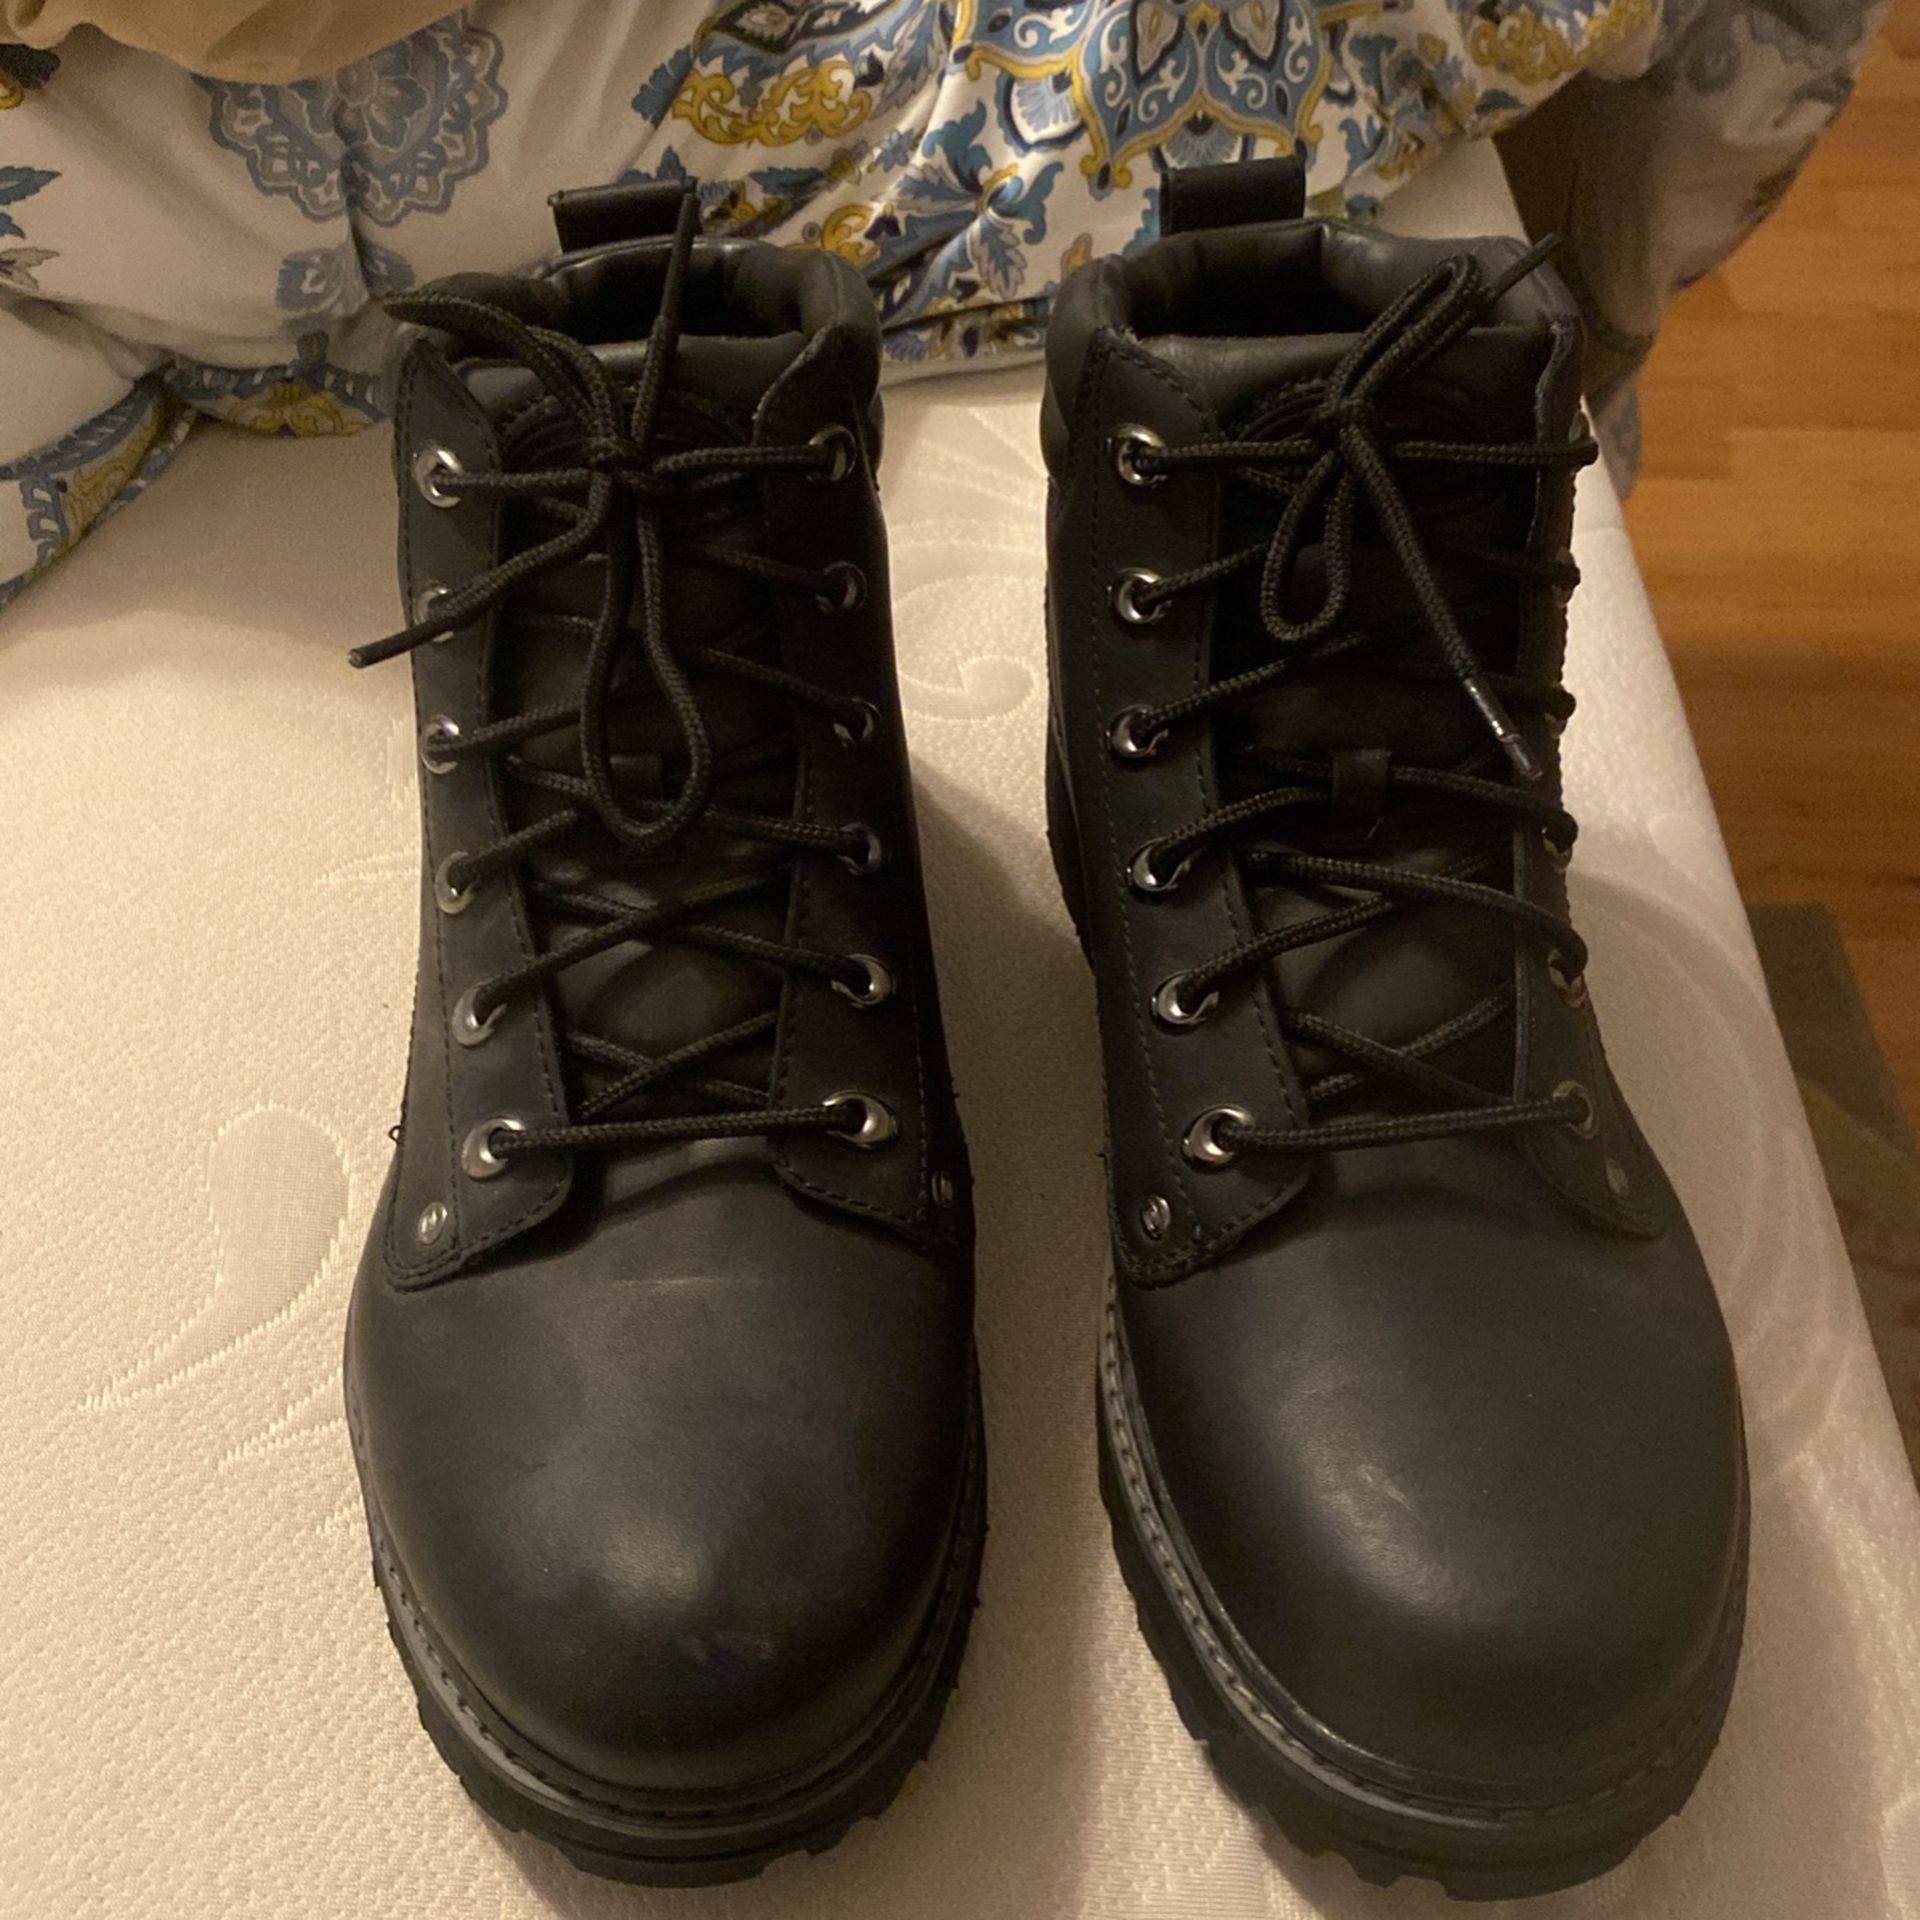 Skechers Black Leather Boots